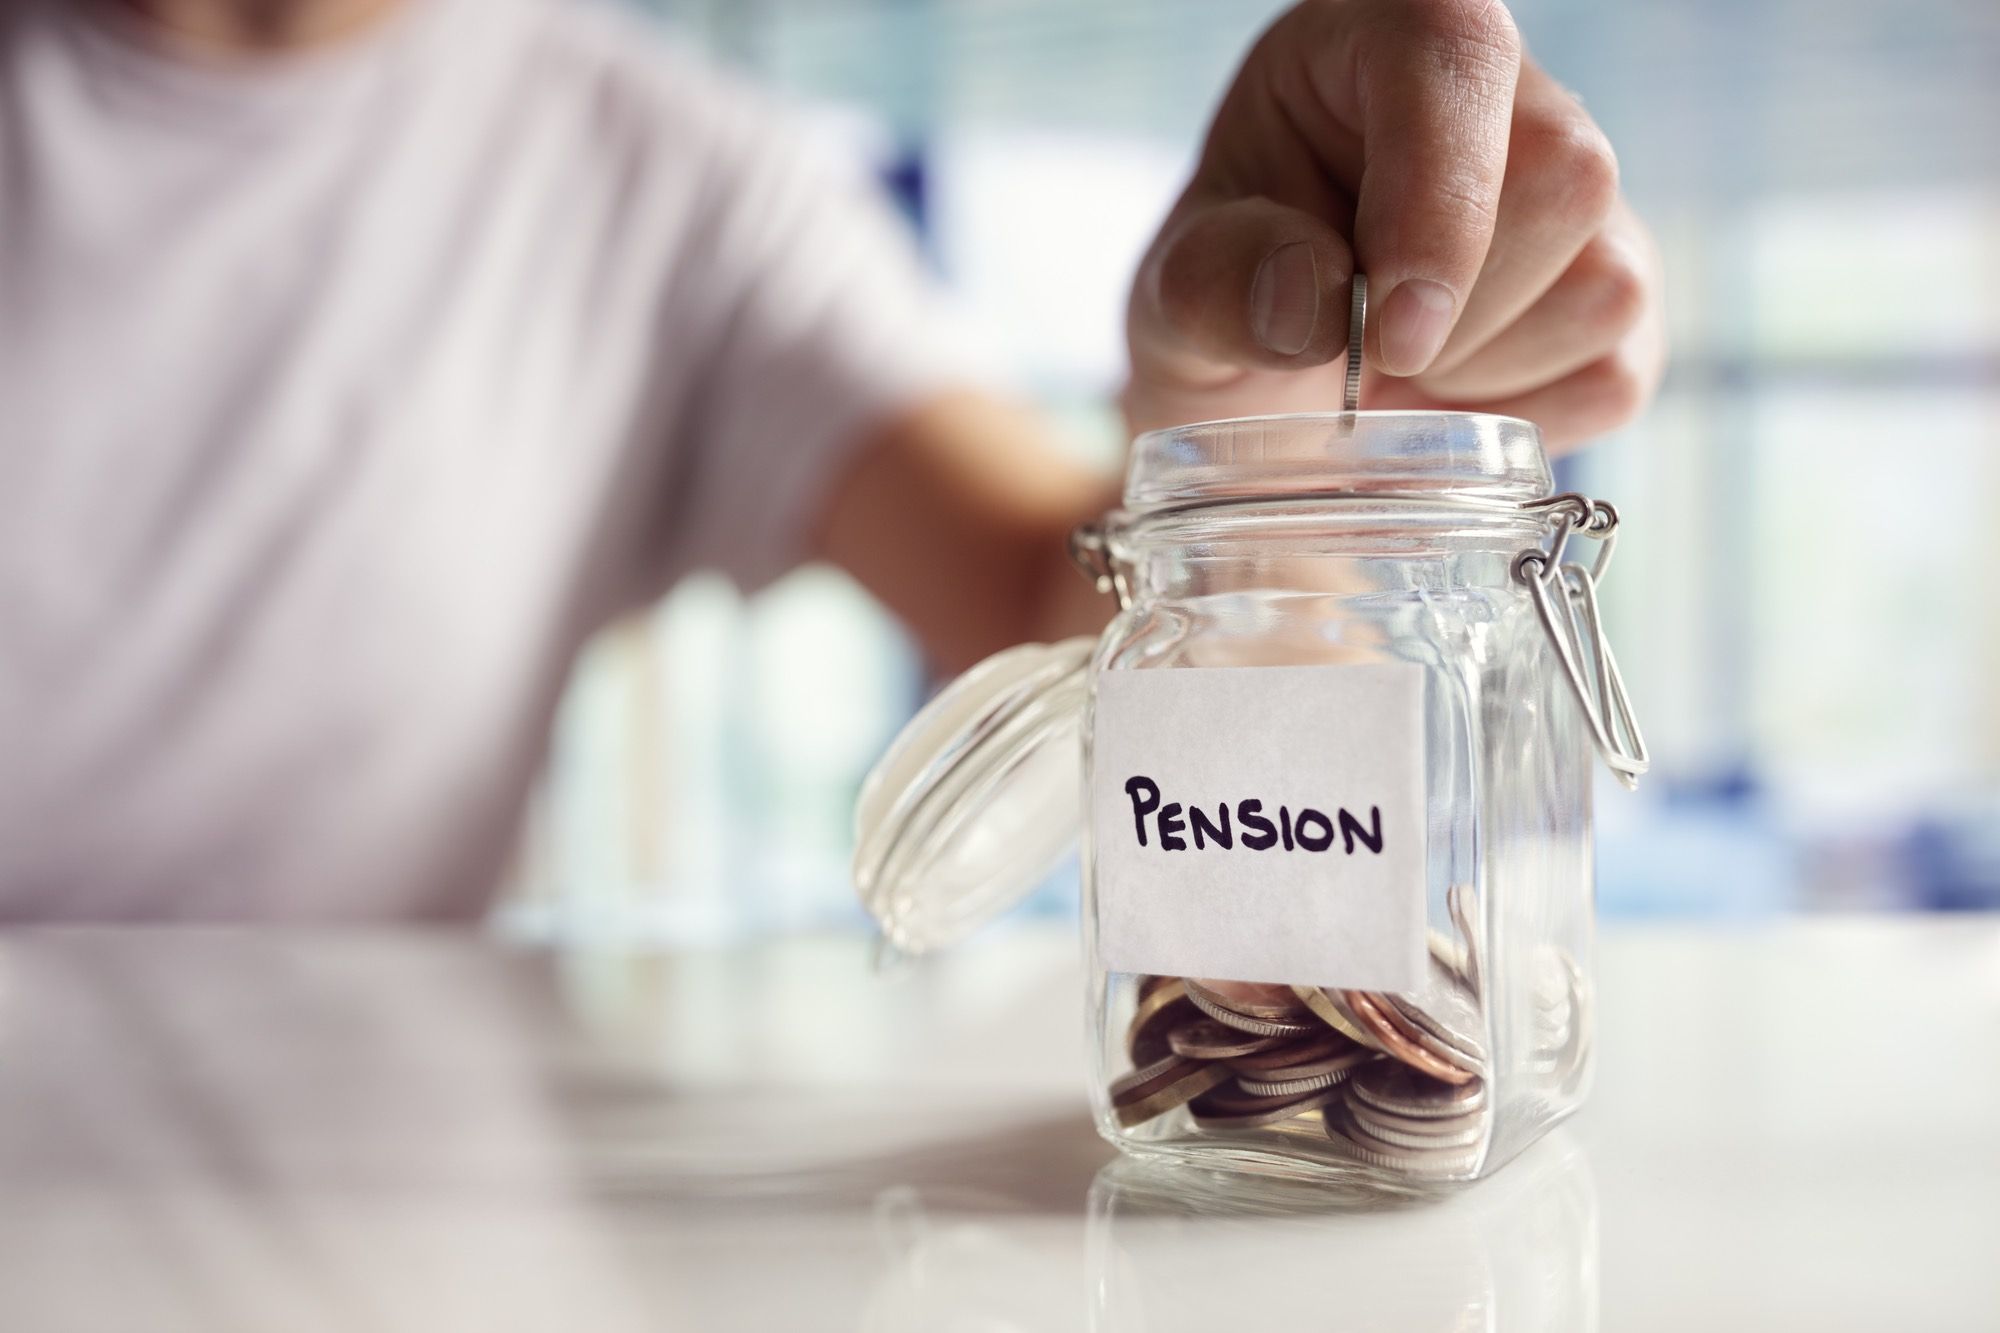 Putting coins in pension jar amid pension plan changes